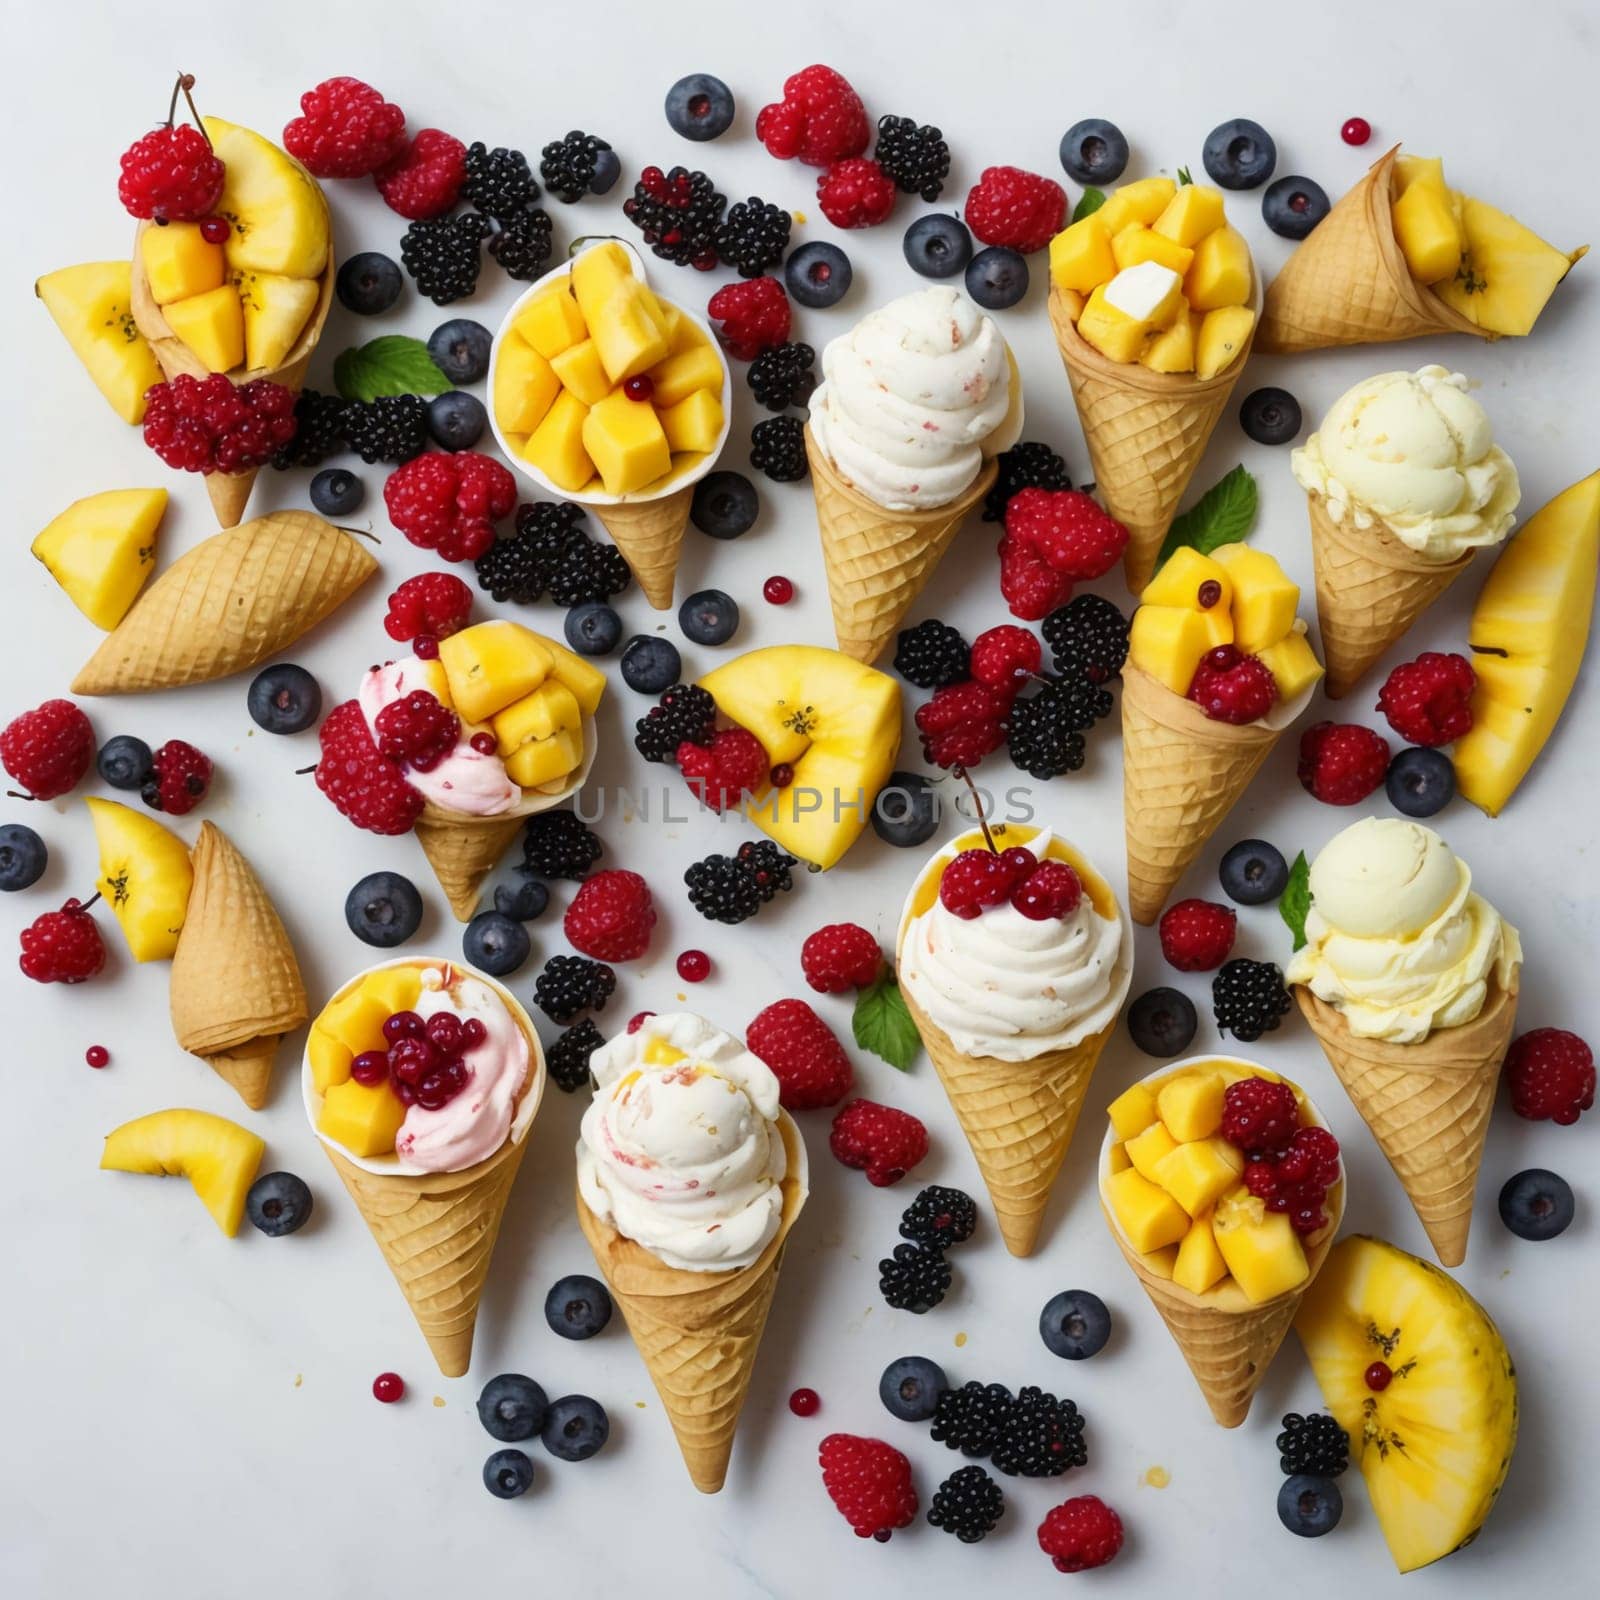 ice cream cones with frozen mango, pineapple, red and black currant berries on a white-gray background by Севостьянов